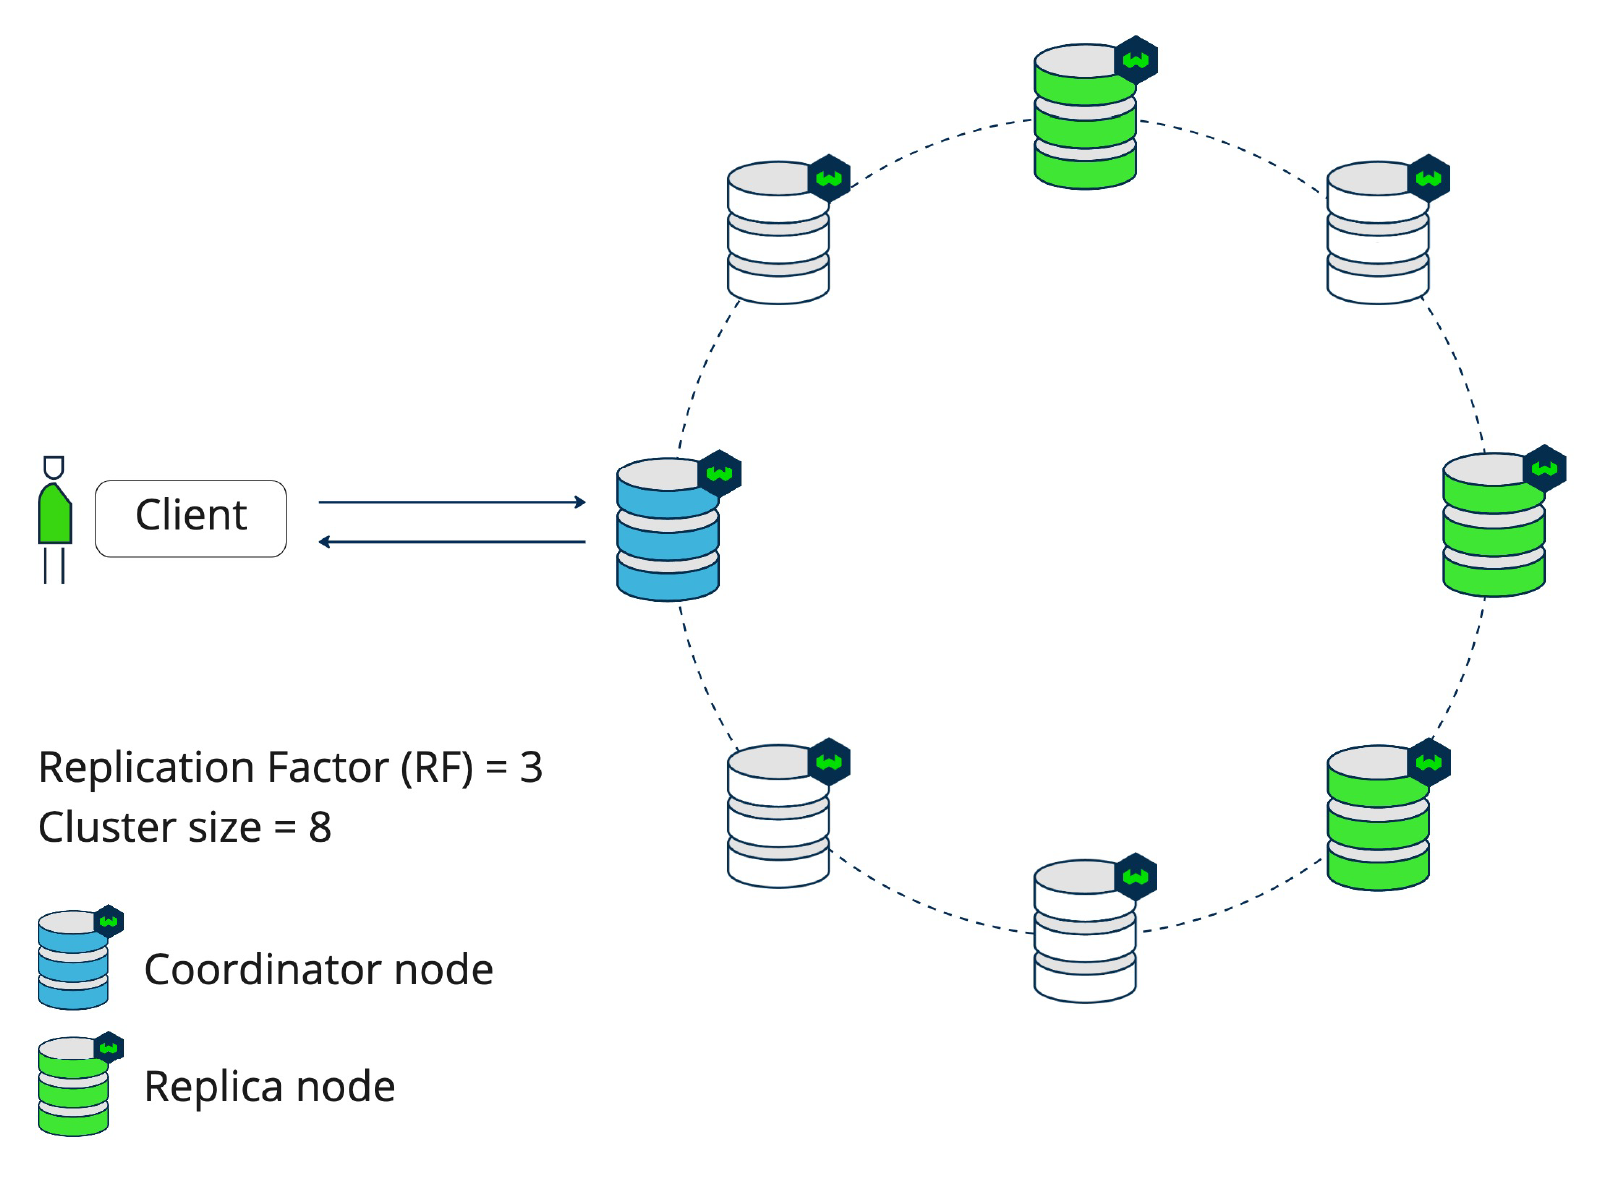 Replication Factor 3 with cluster size 8